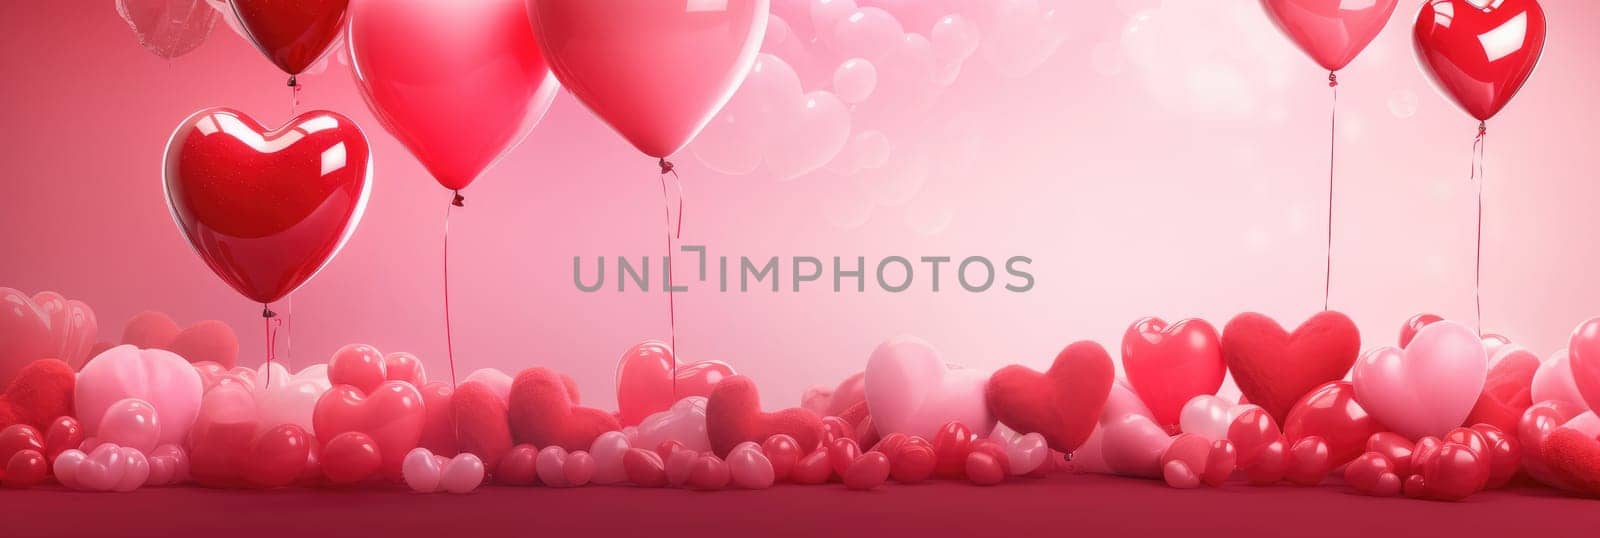 St. Valentines day, wedding banner with abstract illustrated red, pink flying hearts ballons on pink background. Use for cute love sale banners, vouchers or greeting cards. Concept love, copy space. by Angelsmoon